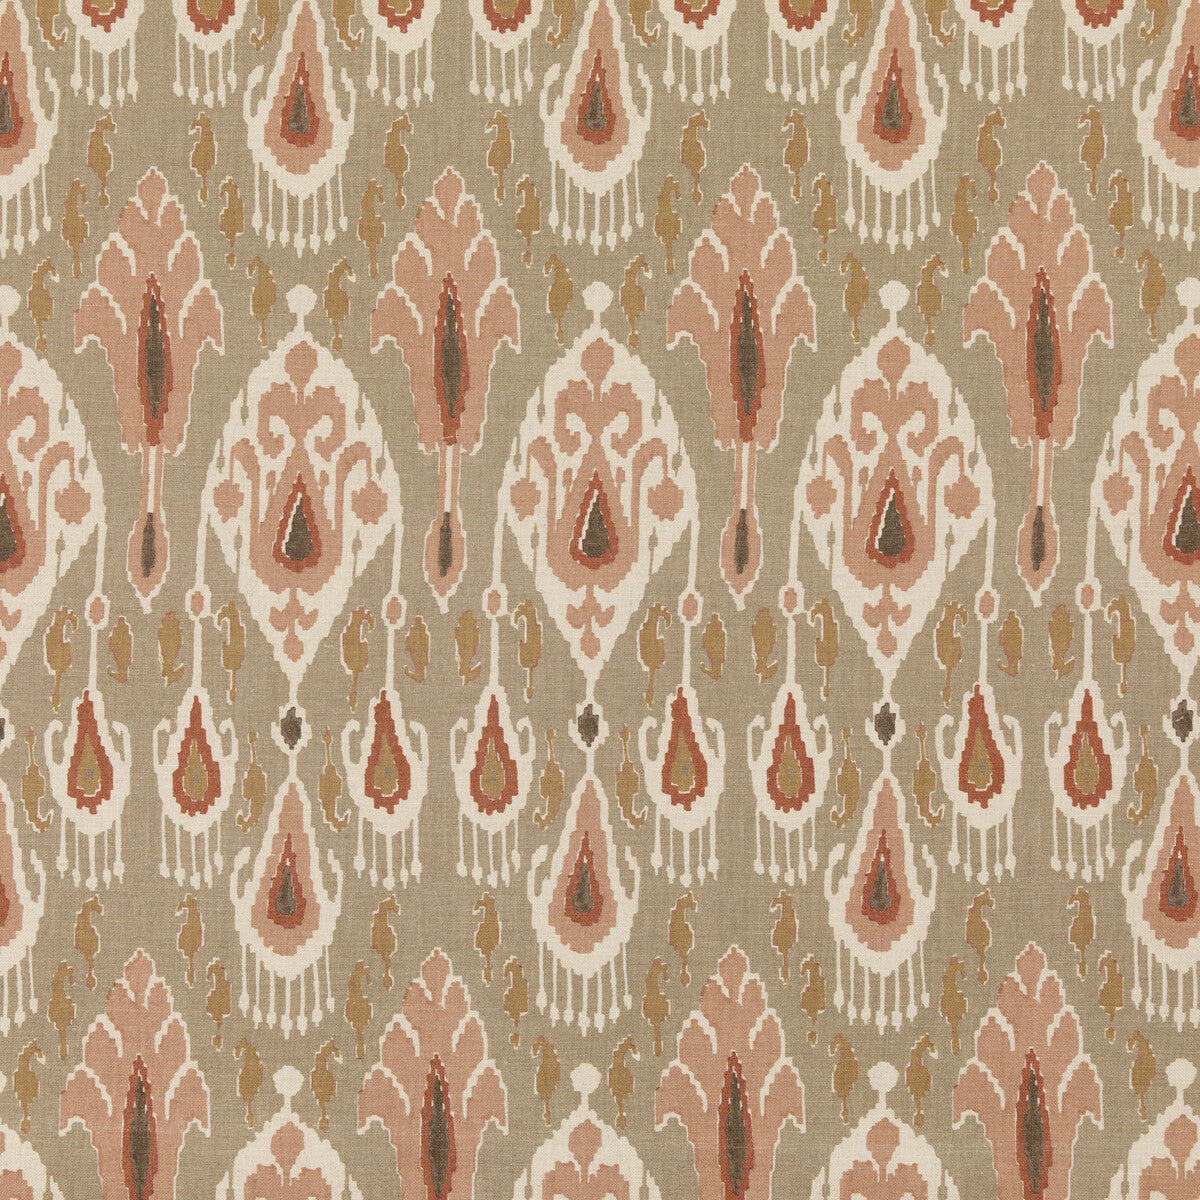 Ikat Bokhara fabric in neutral color - pattern BP10853.5.0 - by G P &amp; J Baker in the Chifu collection